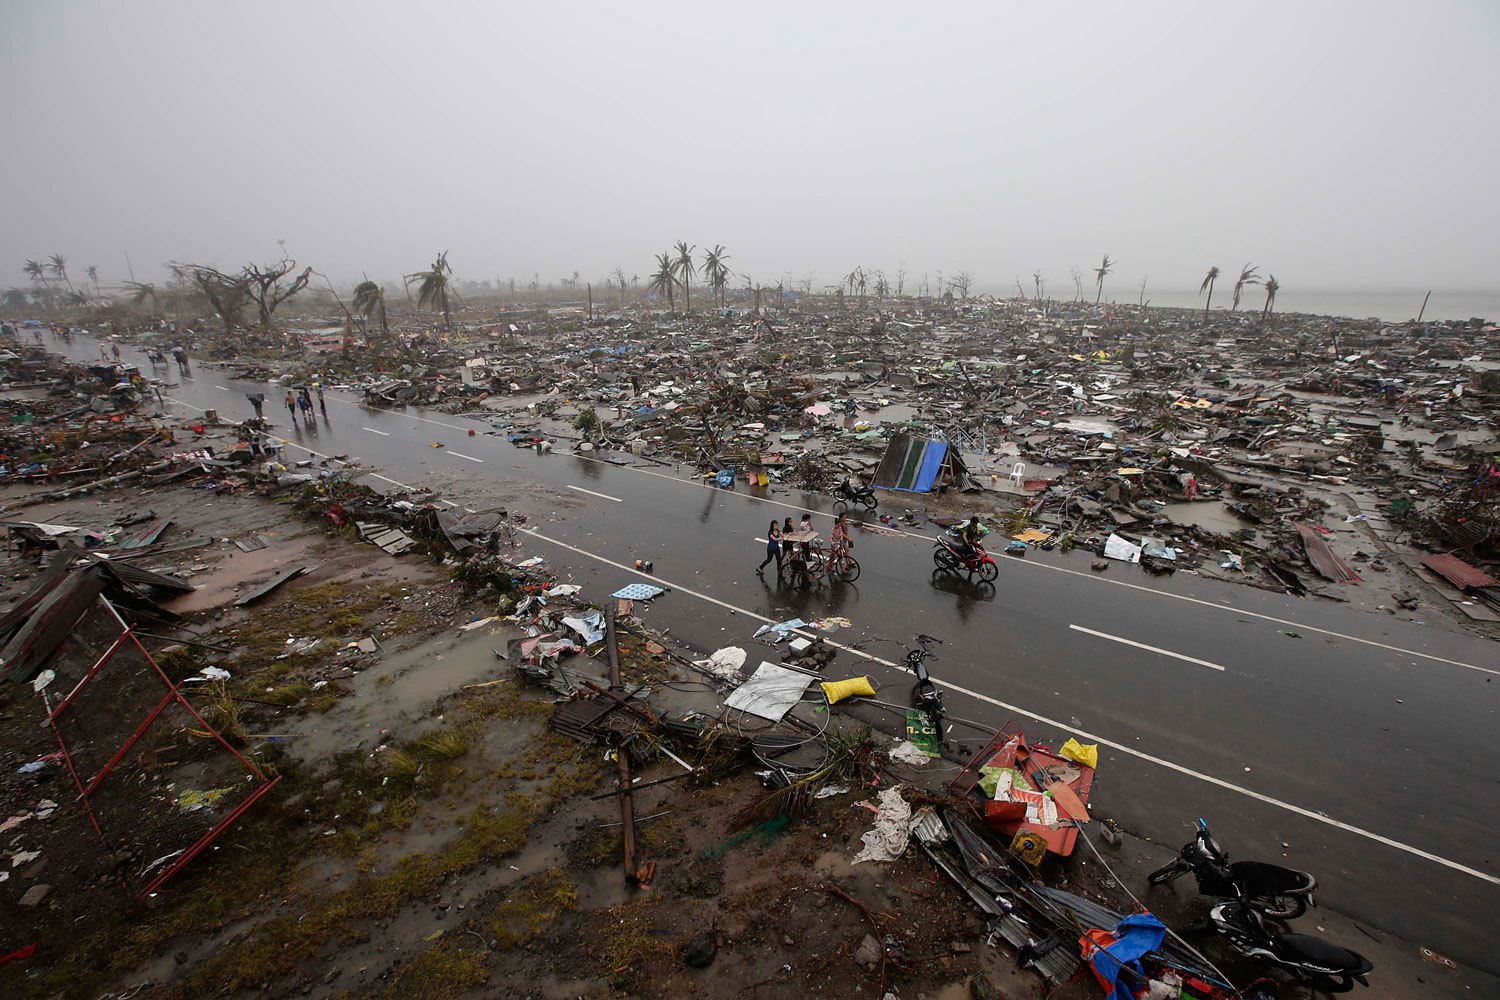 Filipino villagers carrying their belongings during a heavy downpour walk past rubble of houses in the supertyphoon-devastated city of Tacloban, in the Philippines' Leyte province, on Nov. 10, 2013